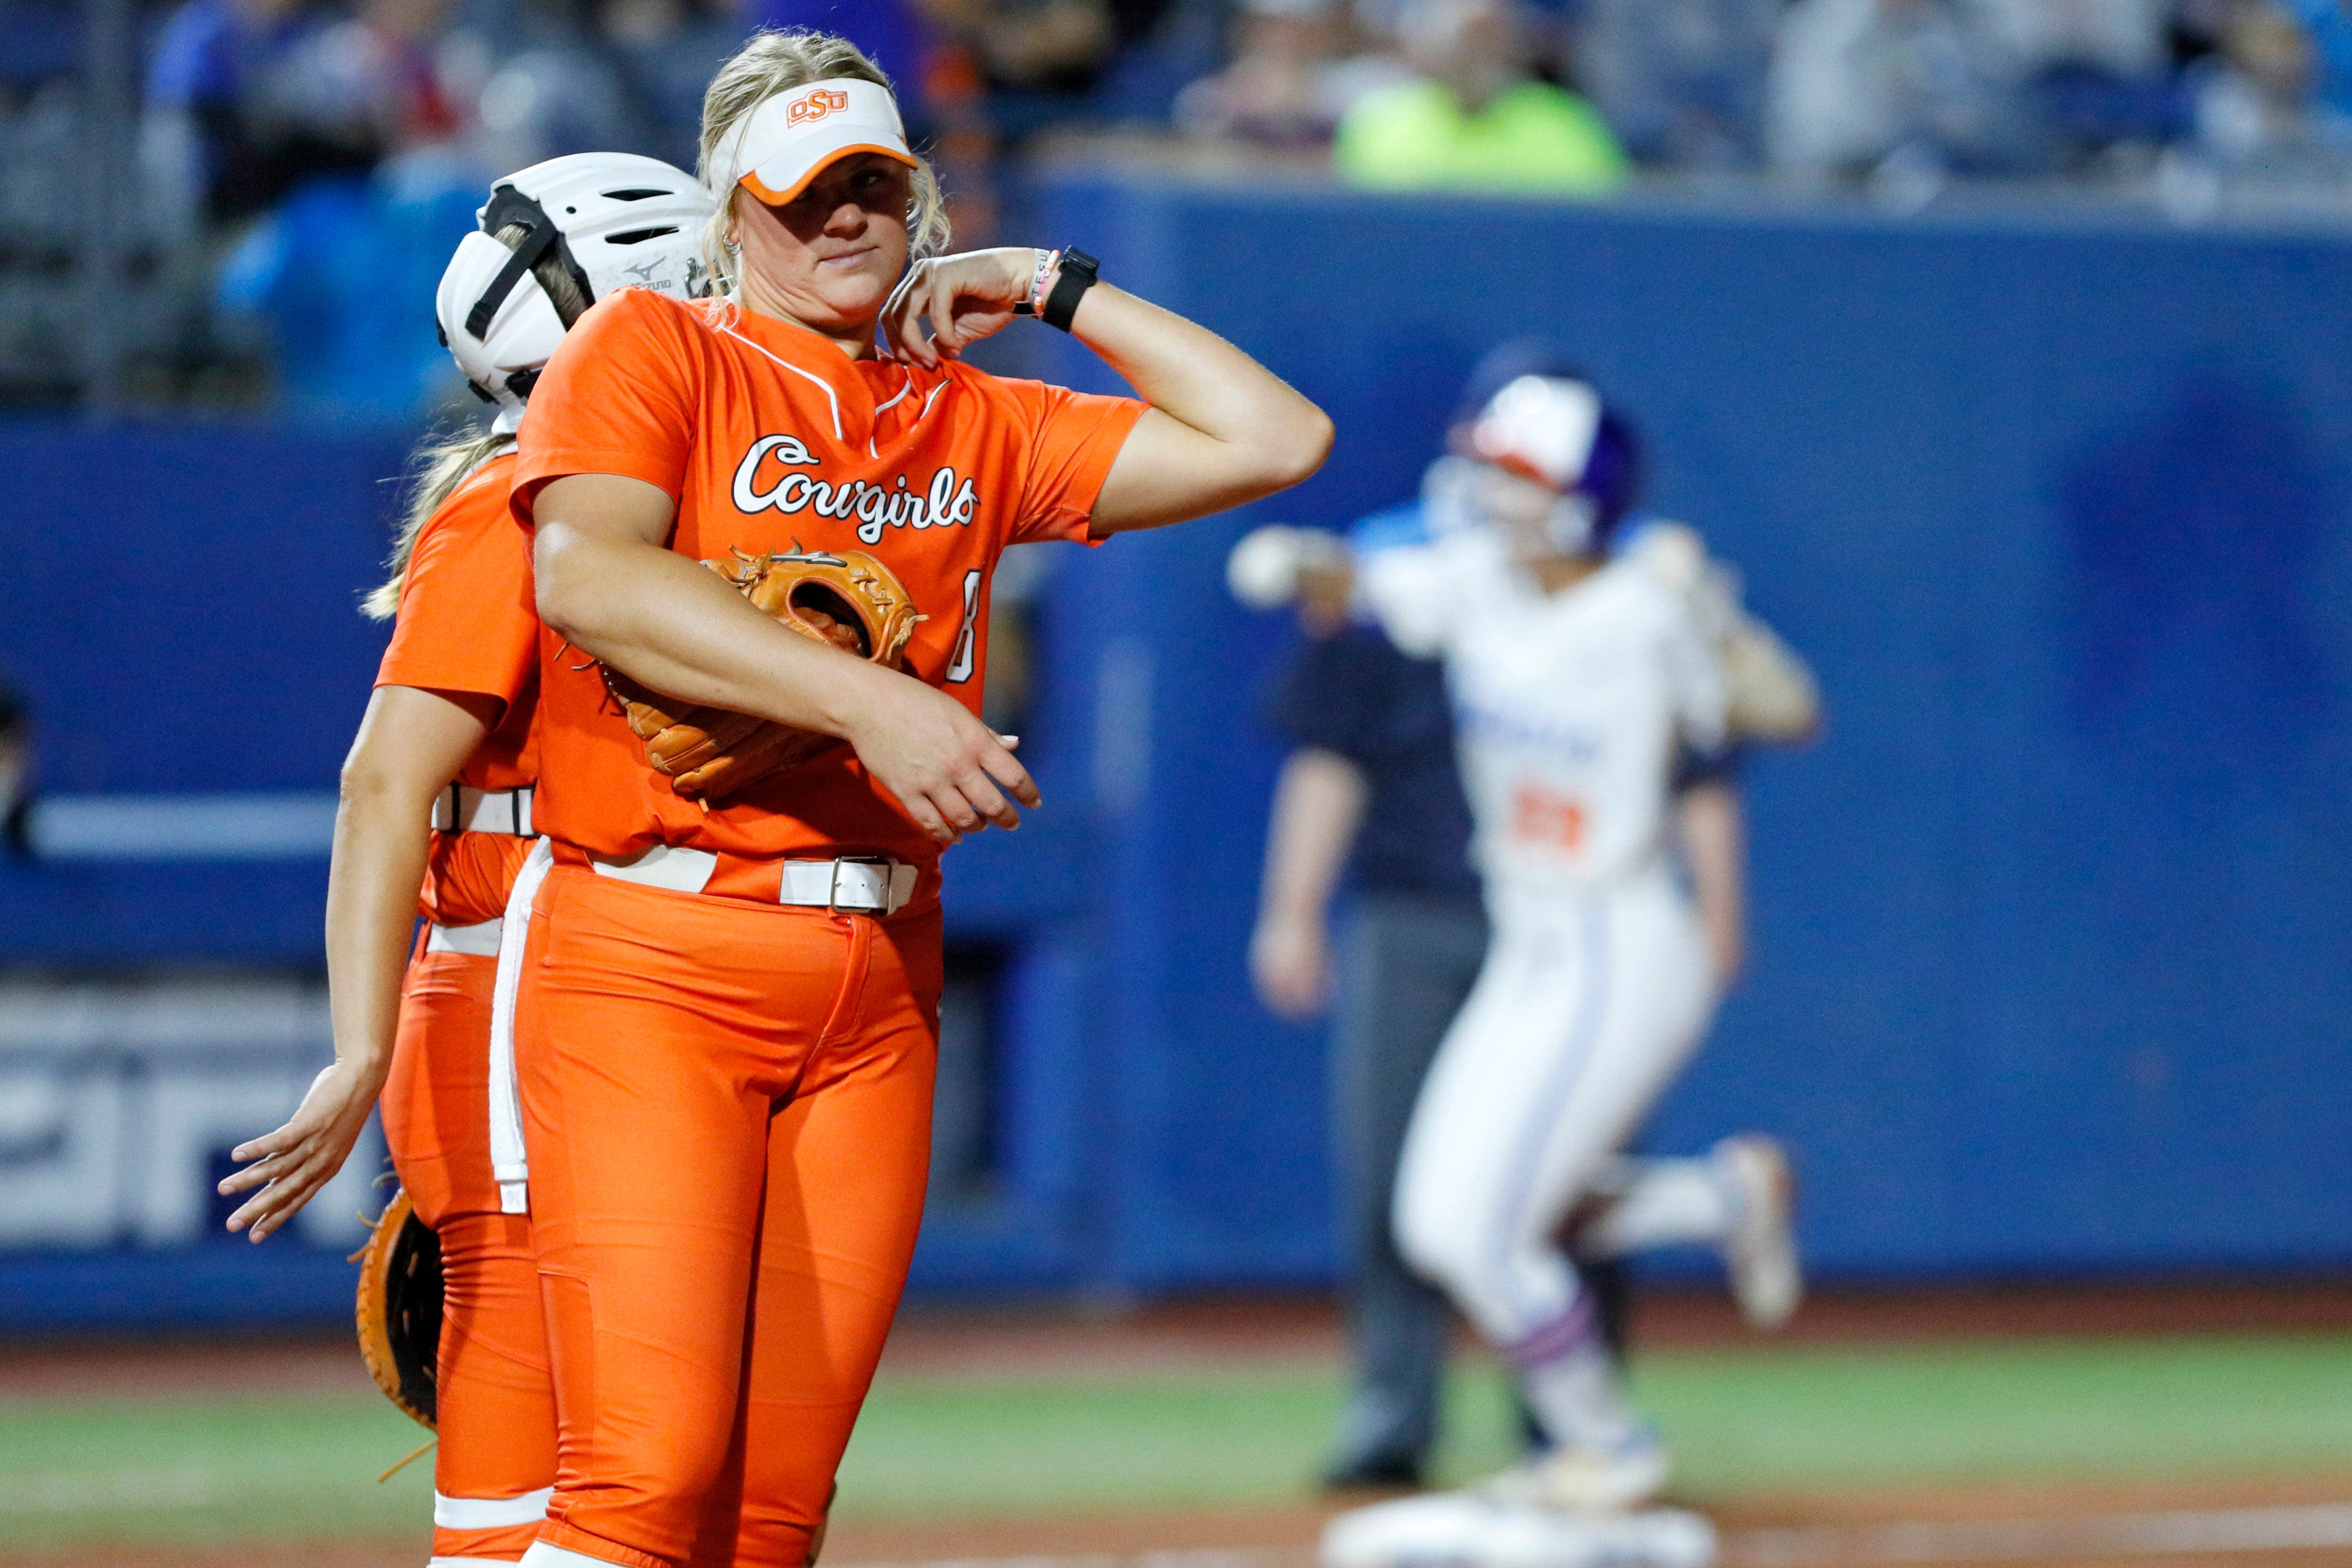 Oklahoma State softball season on the brink after shutout loss to Florida in WCWS opener